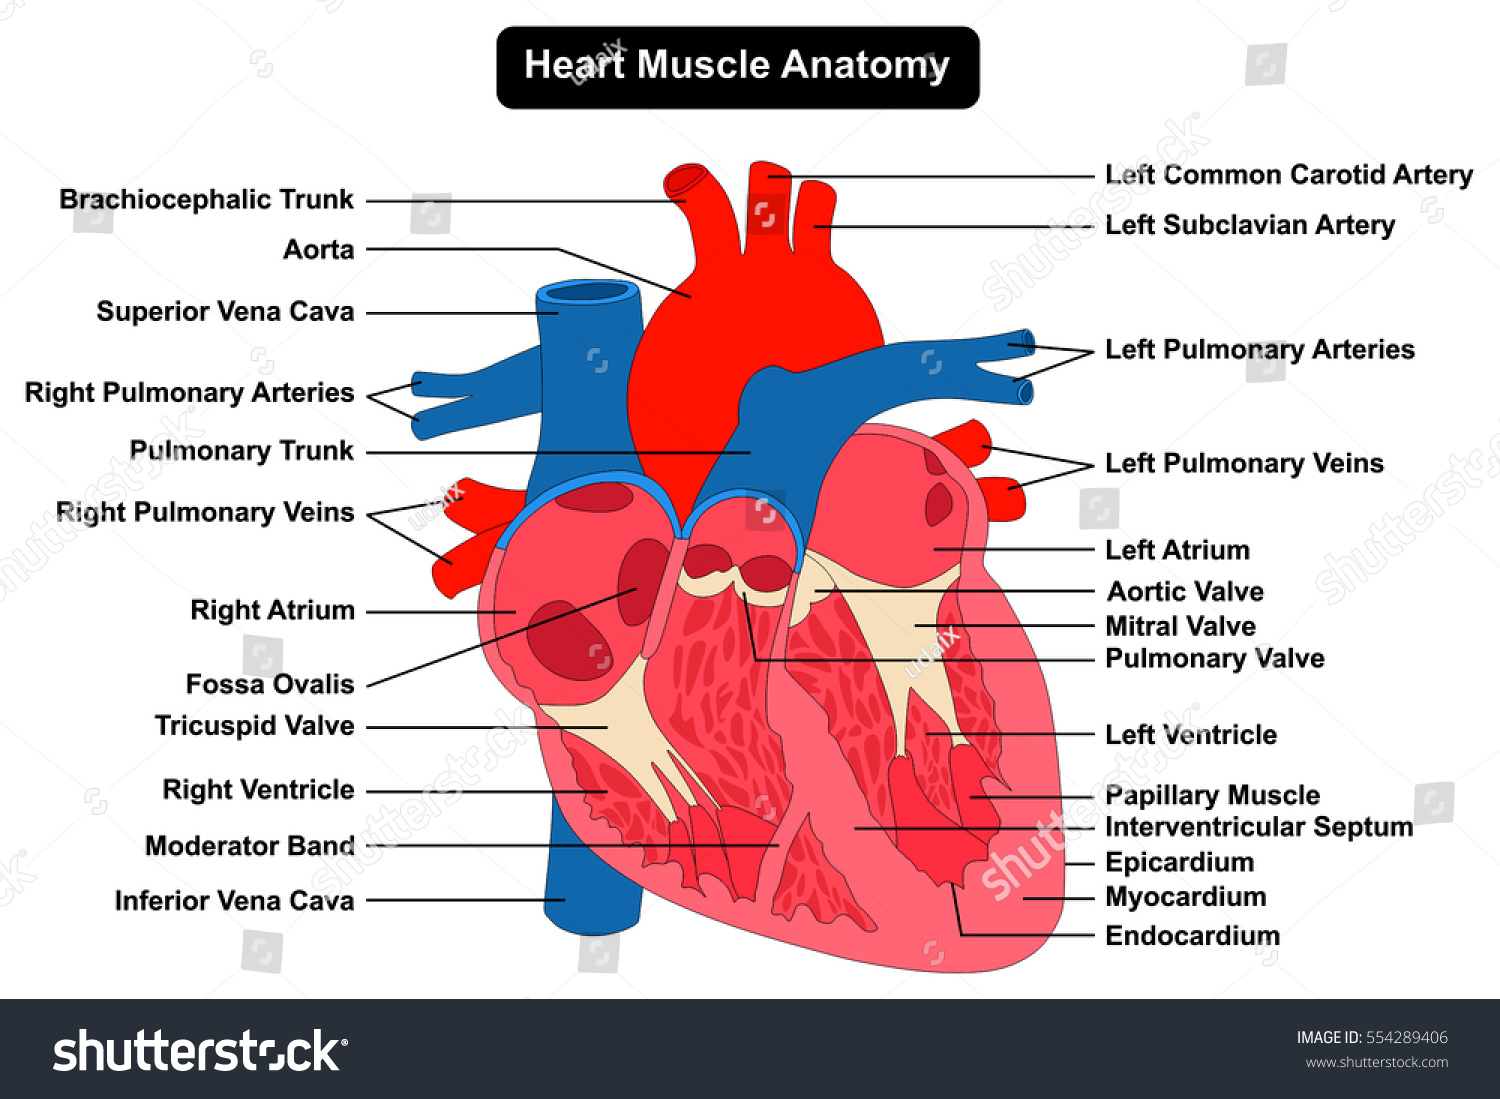 Human Heart Muscle Structure Anatomy Infographic Stock ...